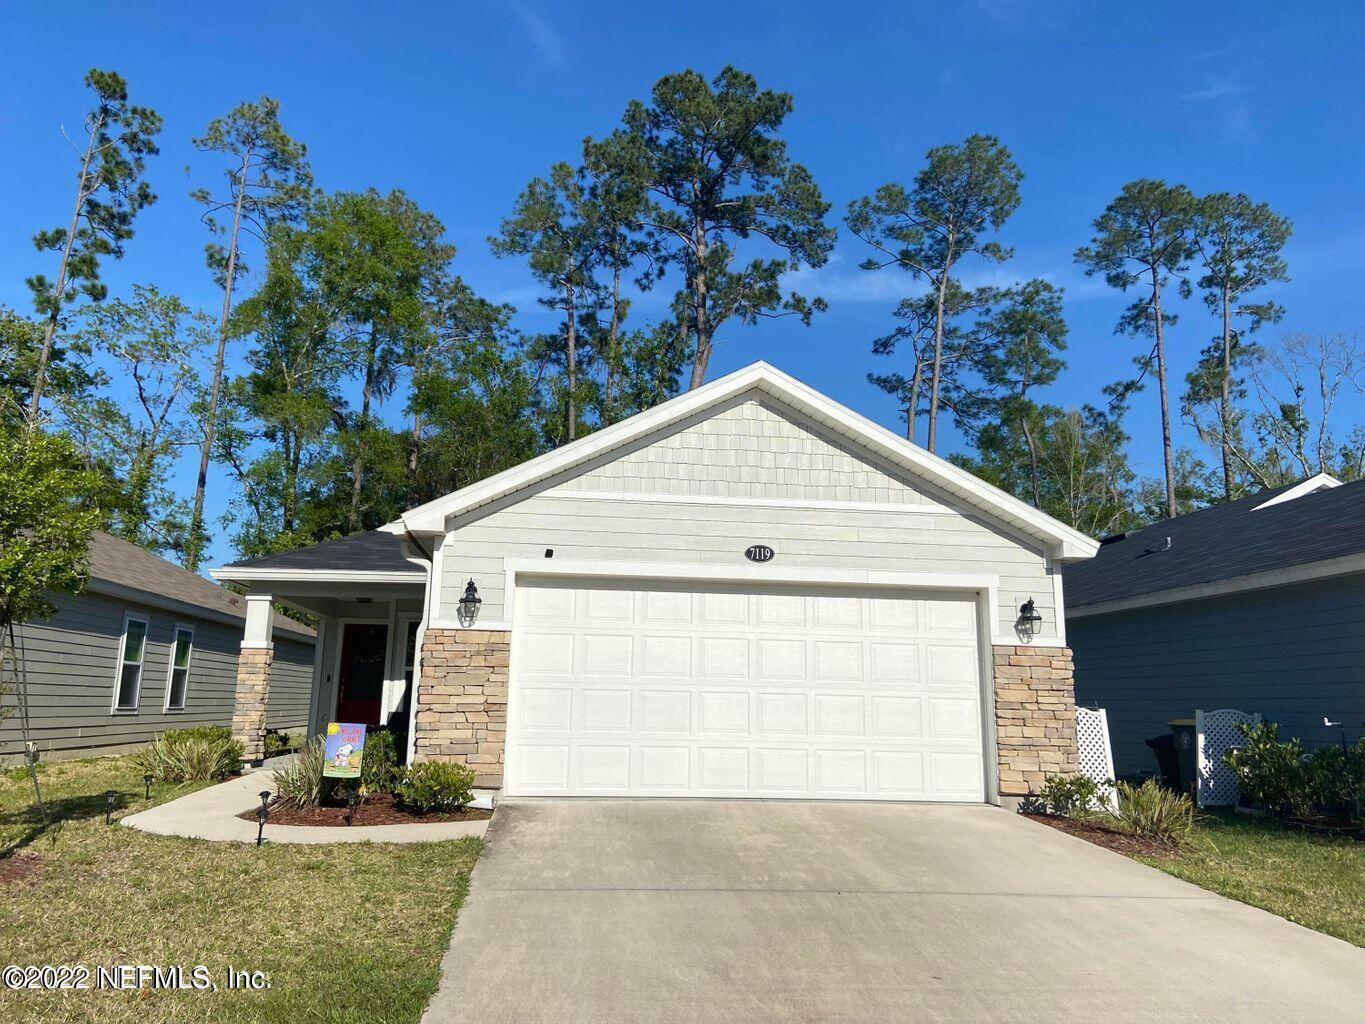 Jacksonville, FL home for sale located at 7119 PRESTON PINES Trail, Jacksonville, FL 32244